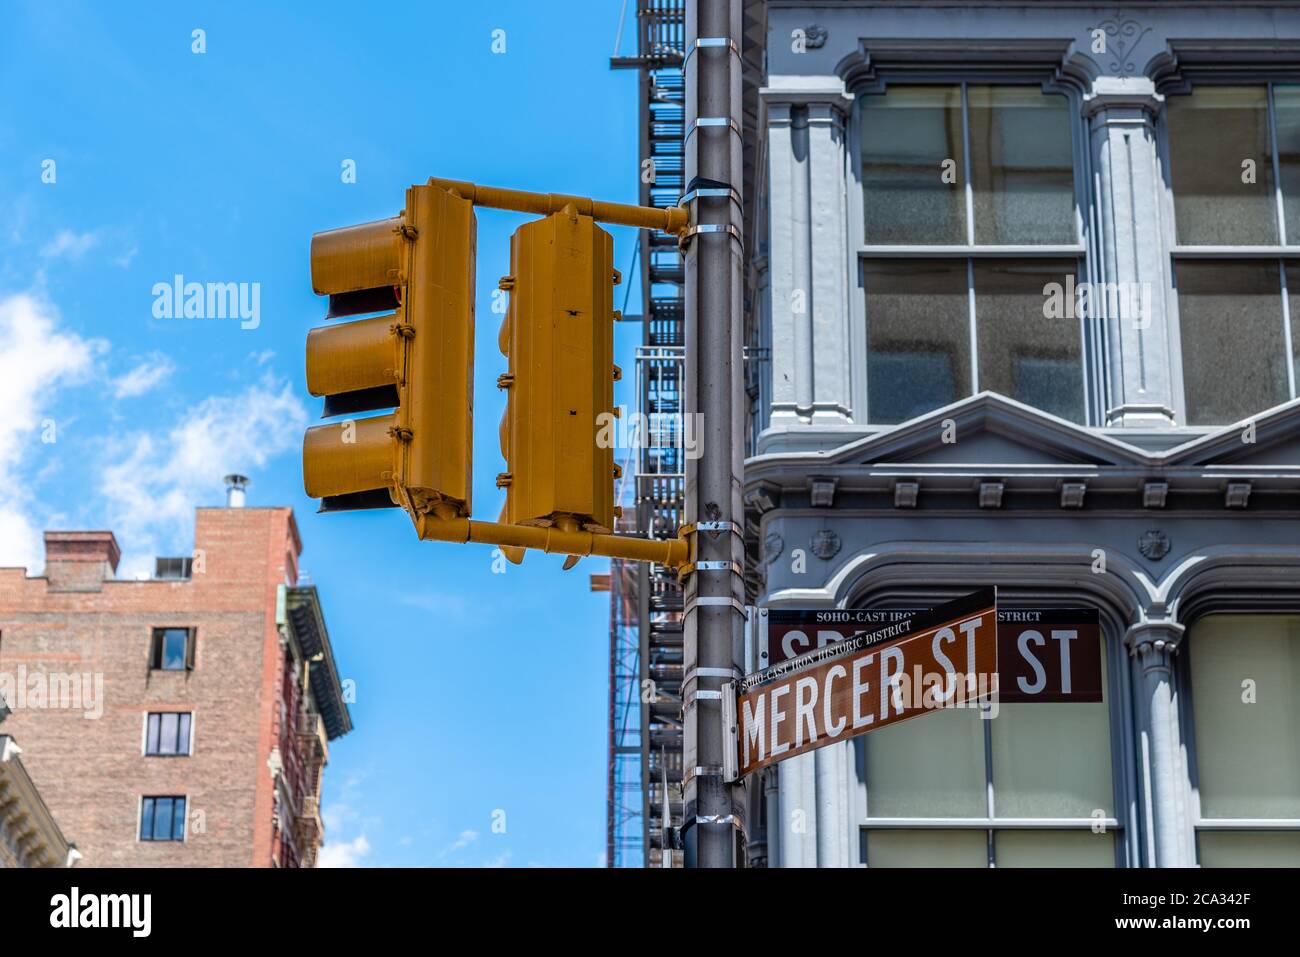 Traffic light and street name sign in Mercer Street in Soho Cast Iron historic District in New York City. Stock Photo